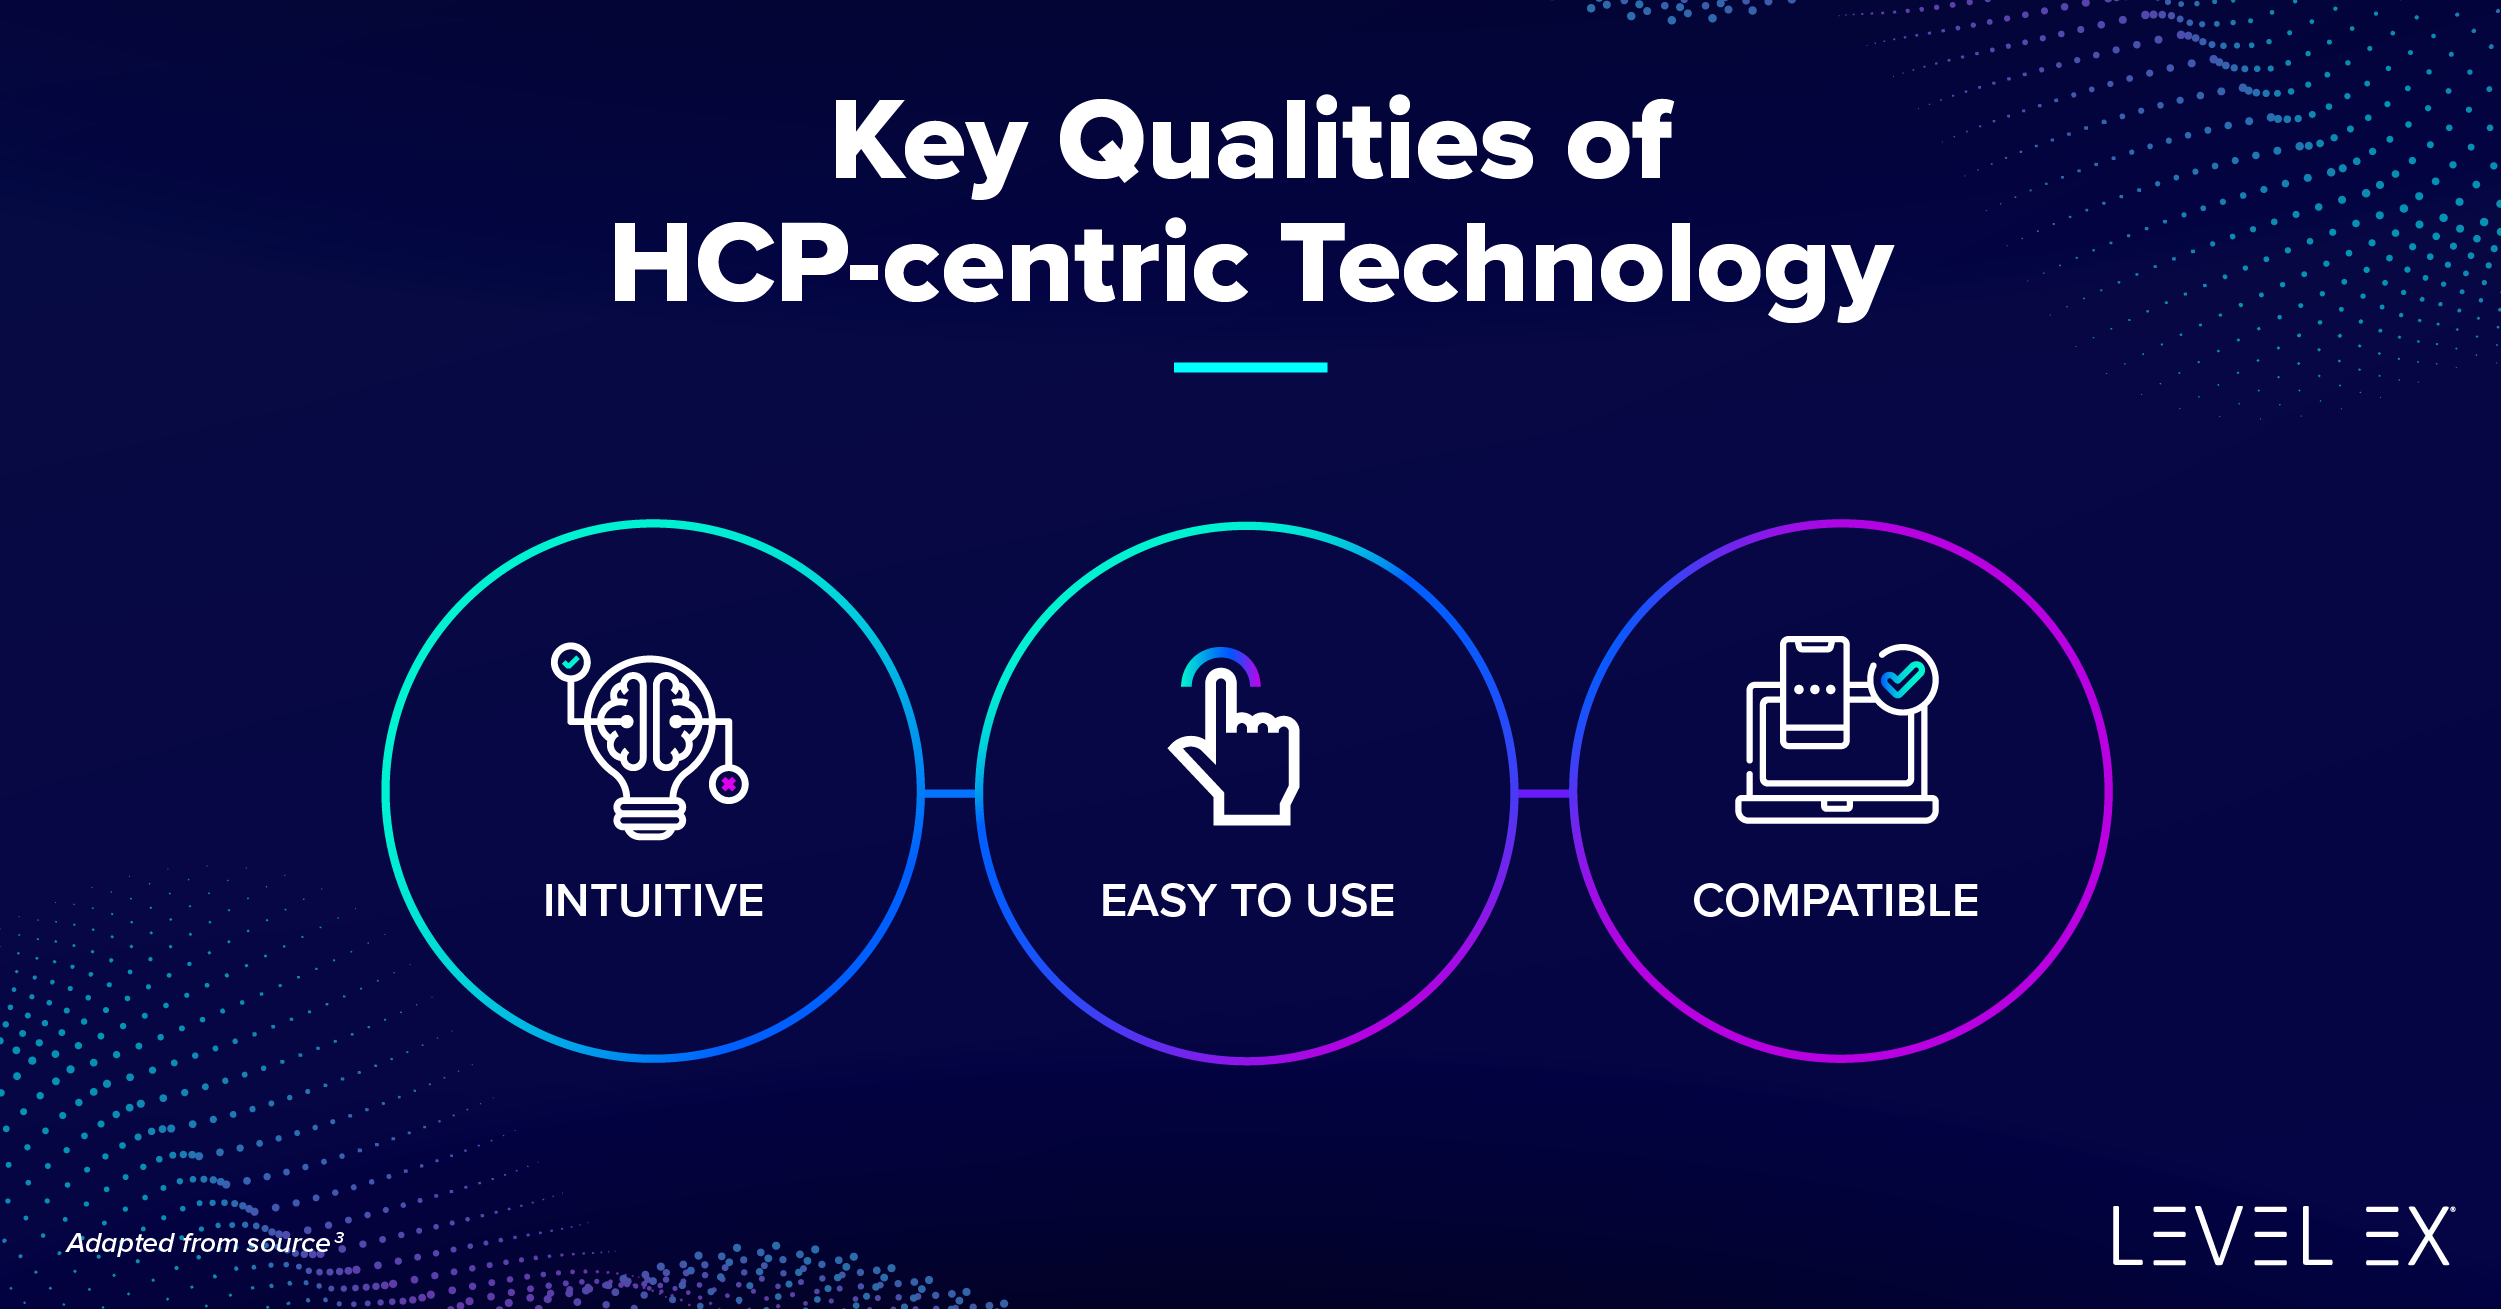 Visual: Key Qualities of HCP-centric Technology